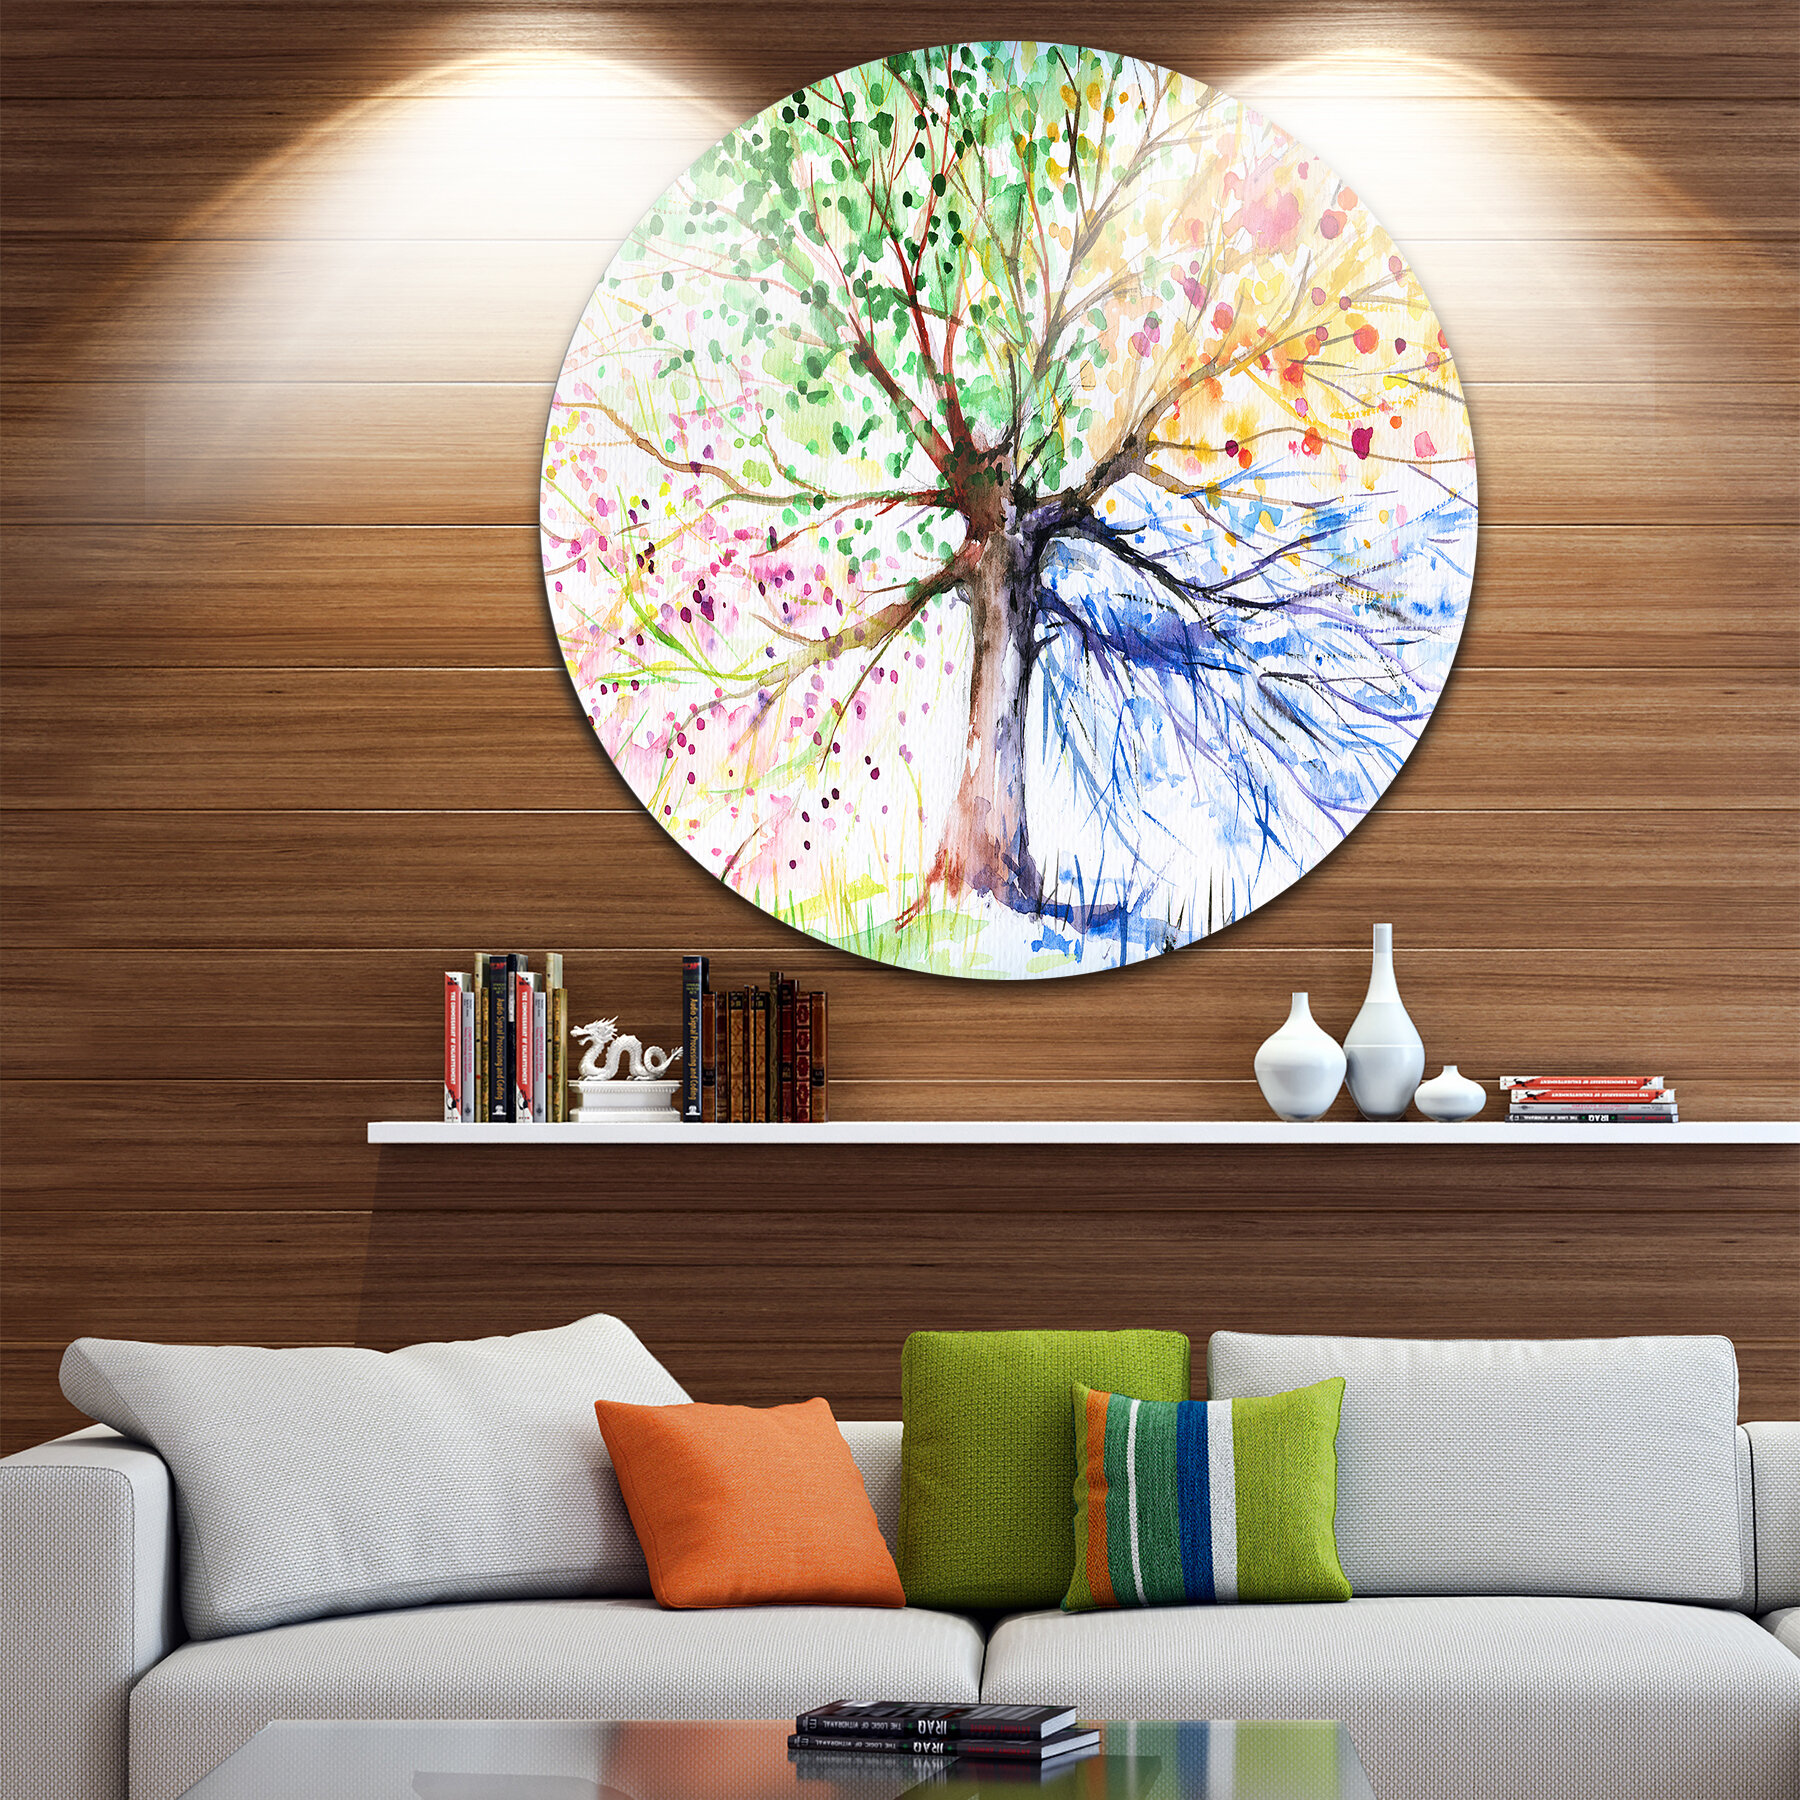 FOUR SEASON TREES ABSTRACT CANVAS PICTURE PRINT WALL ART HOME DECOR DESIGN 